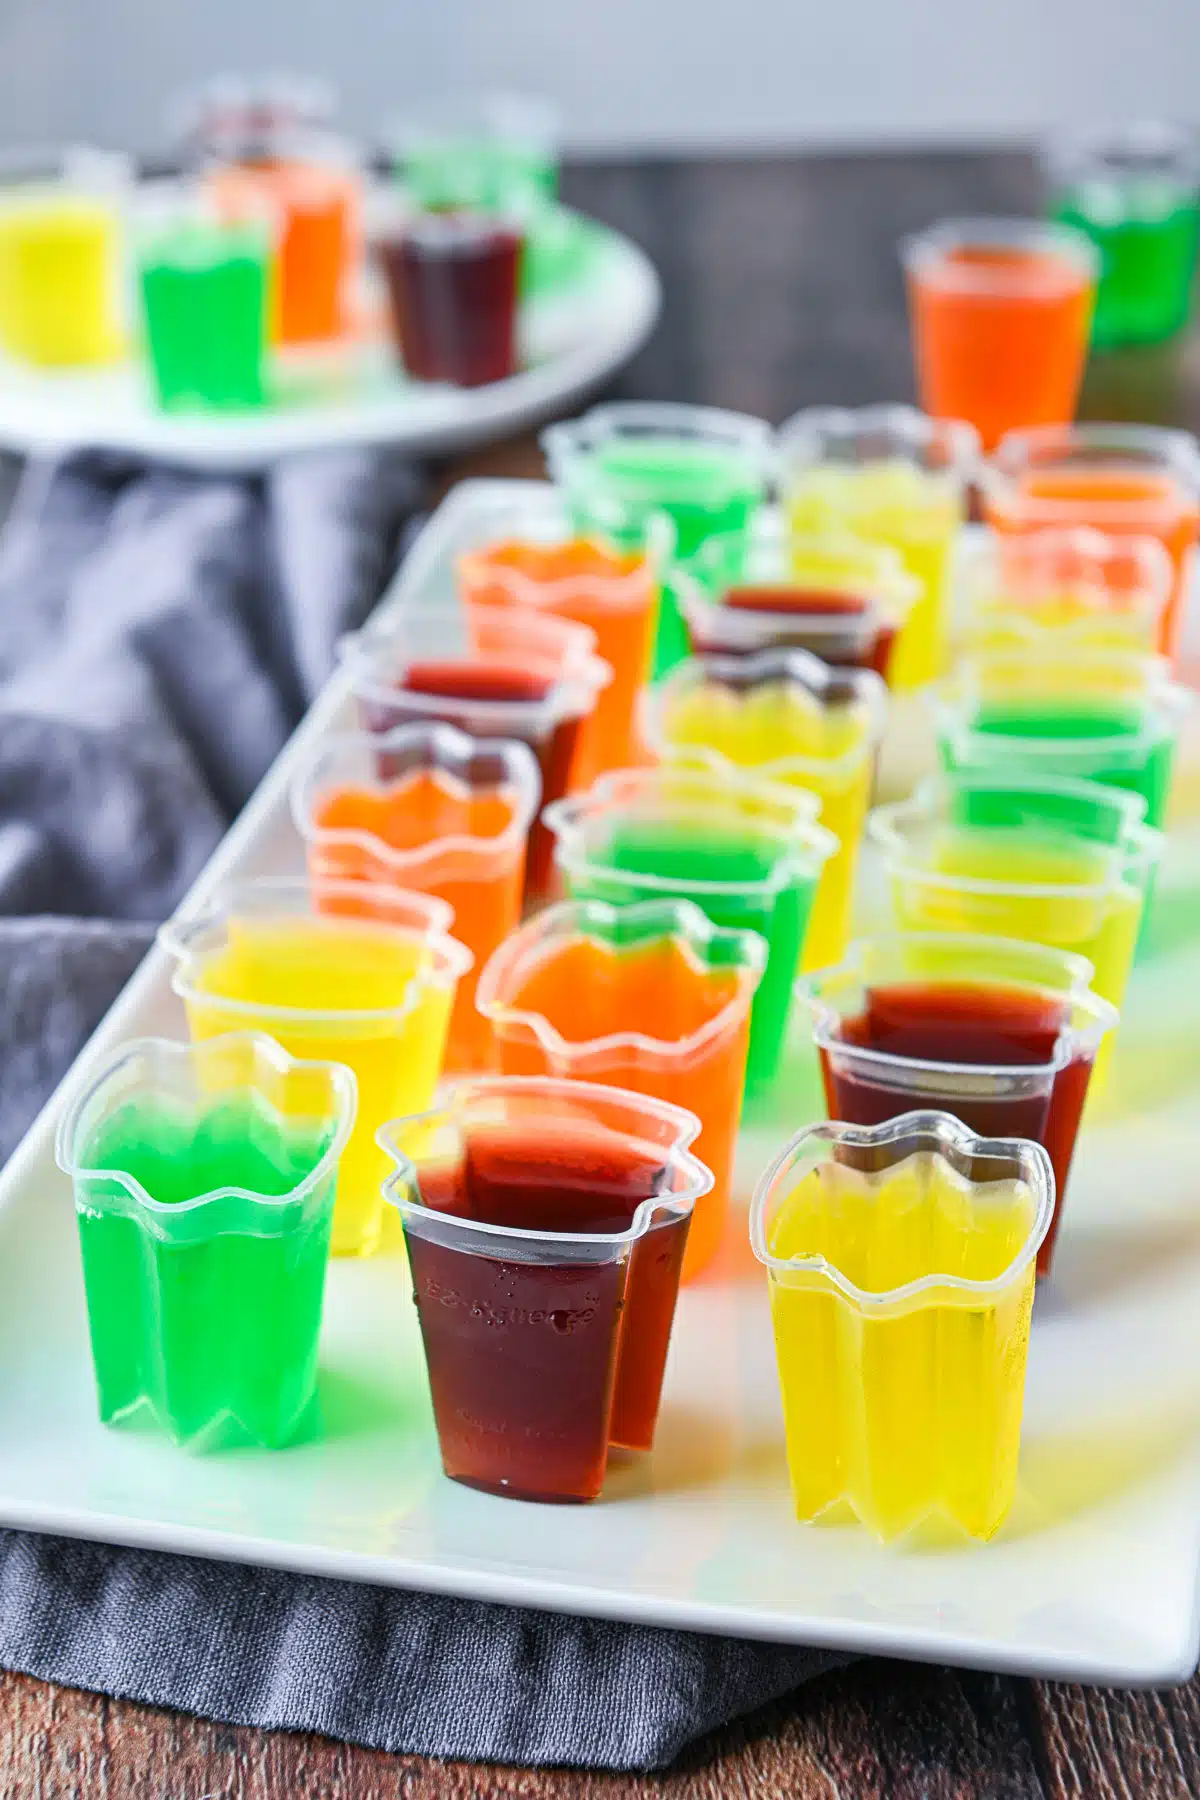 A rectangle platter with red, green, yellow, and orange jello in cups